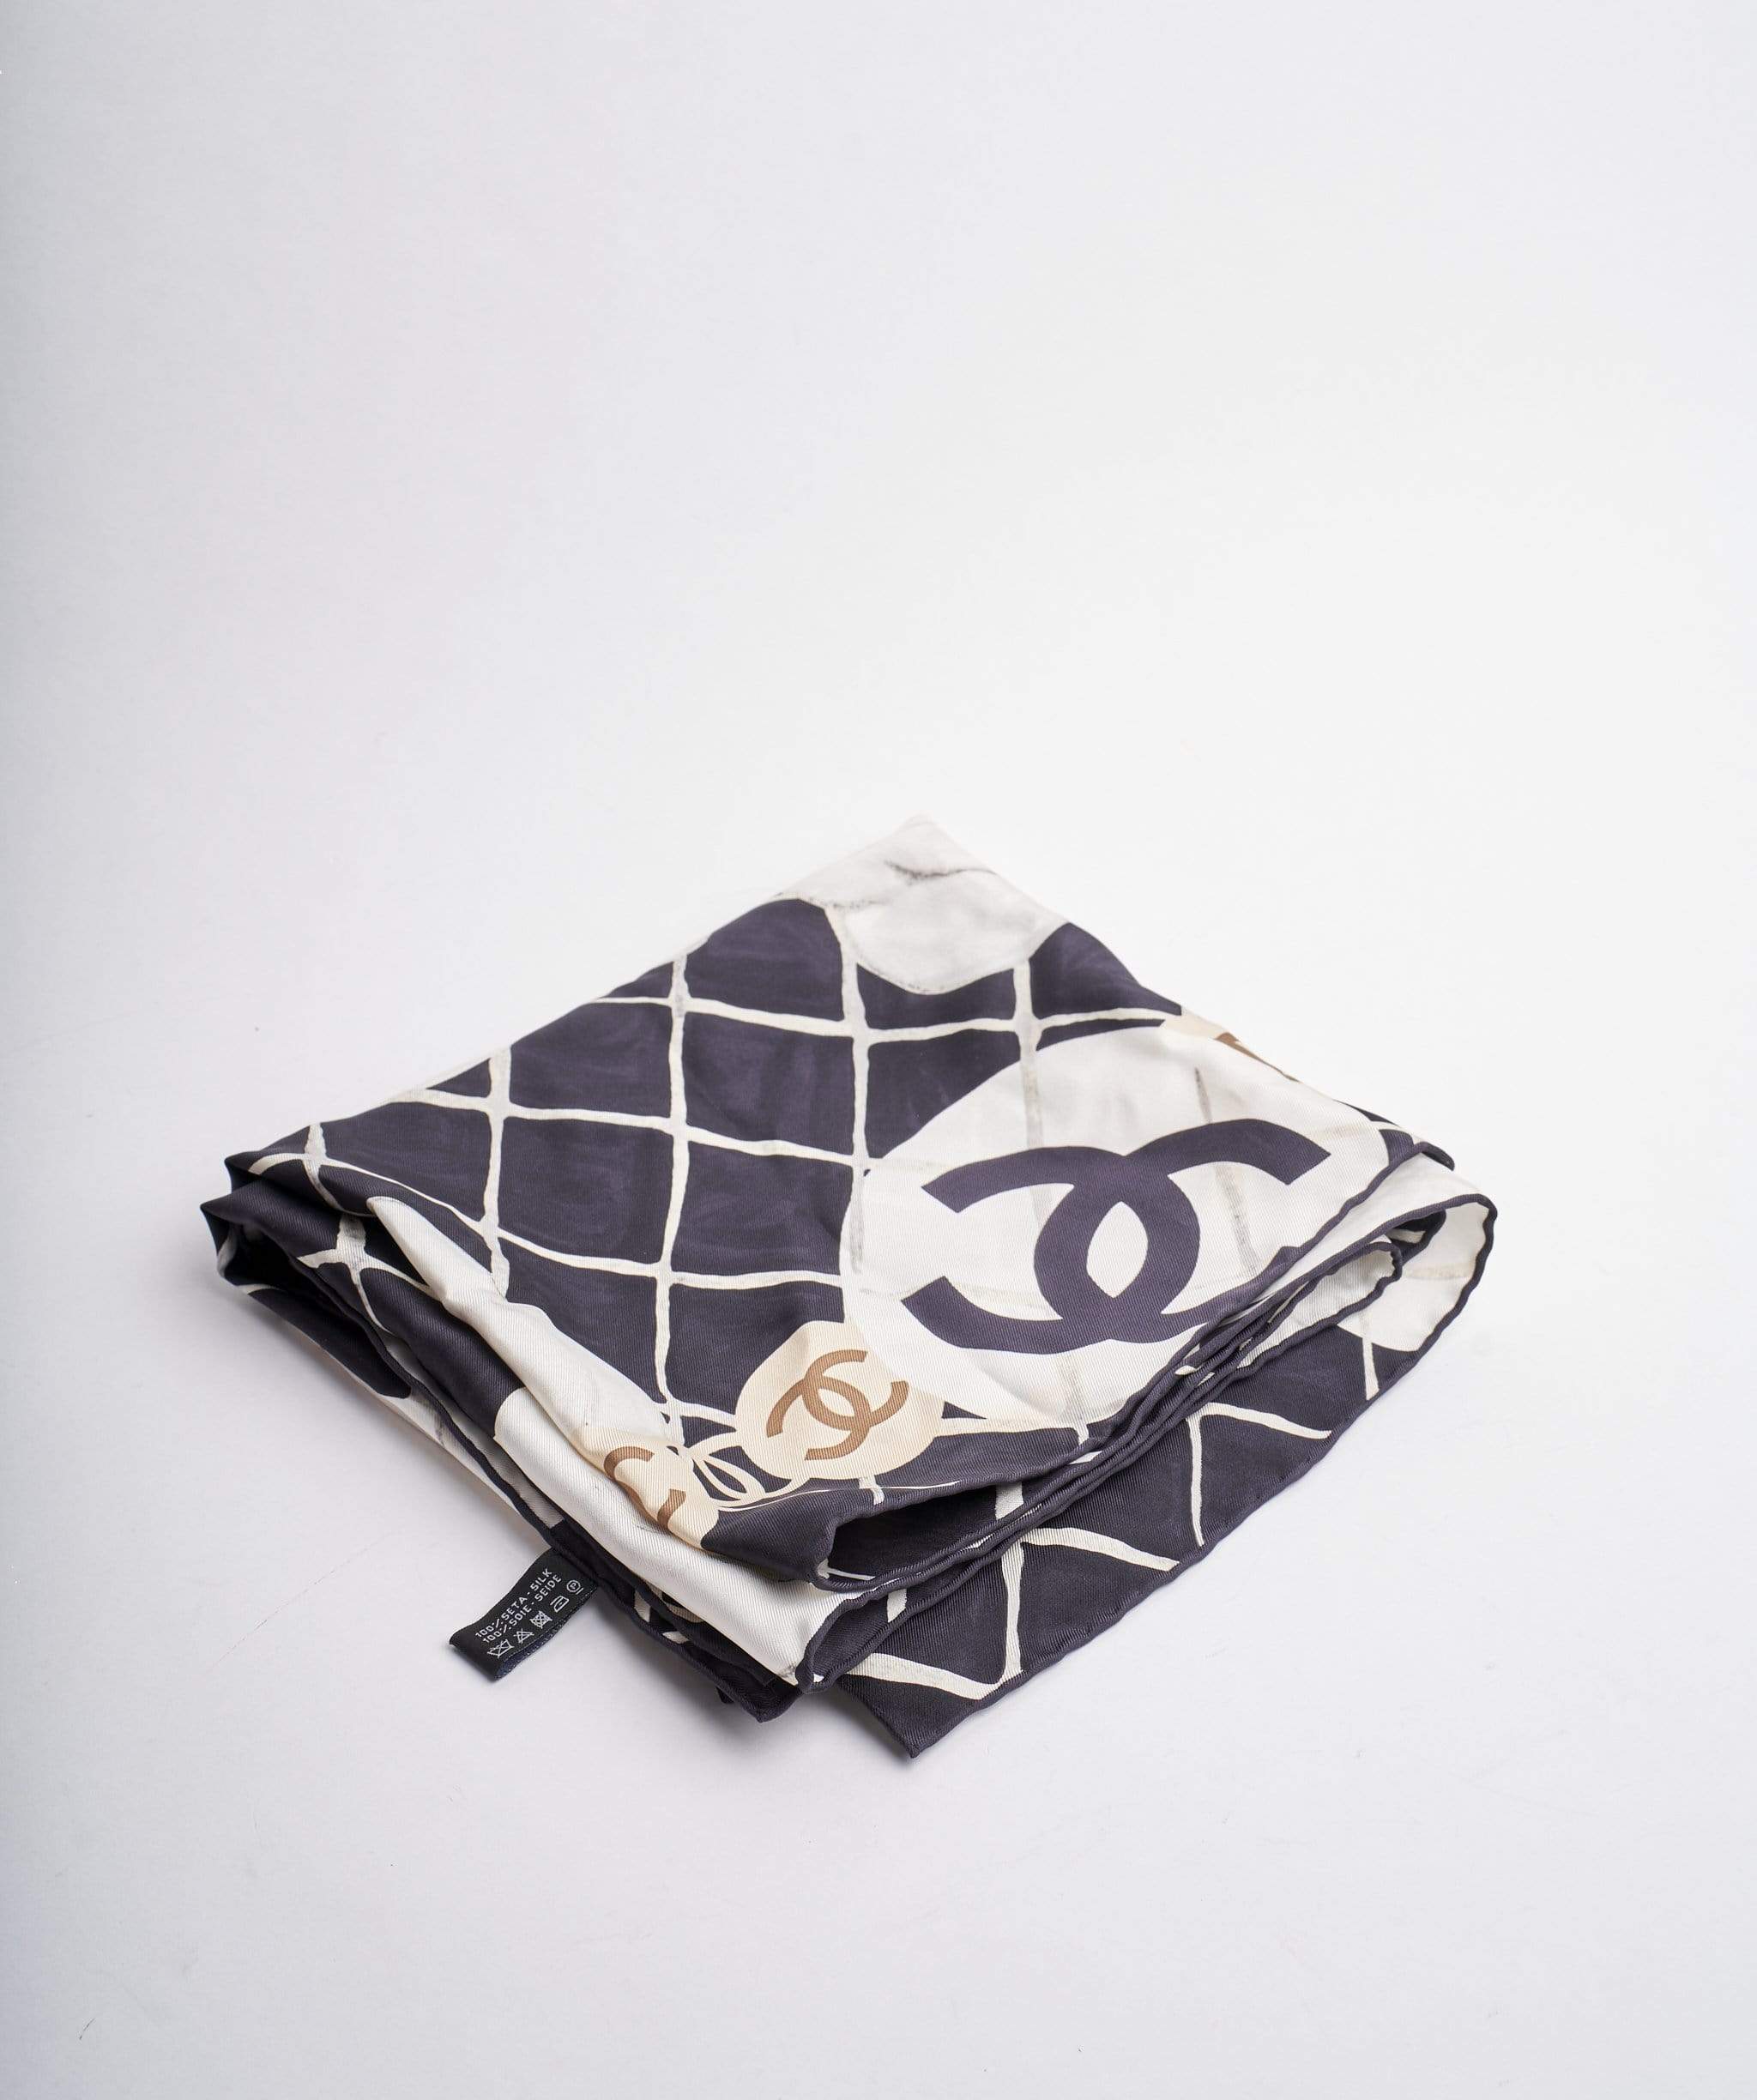 Chanel Chanel silk scarf black and white